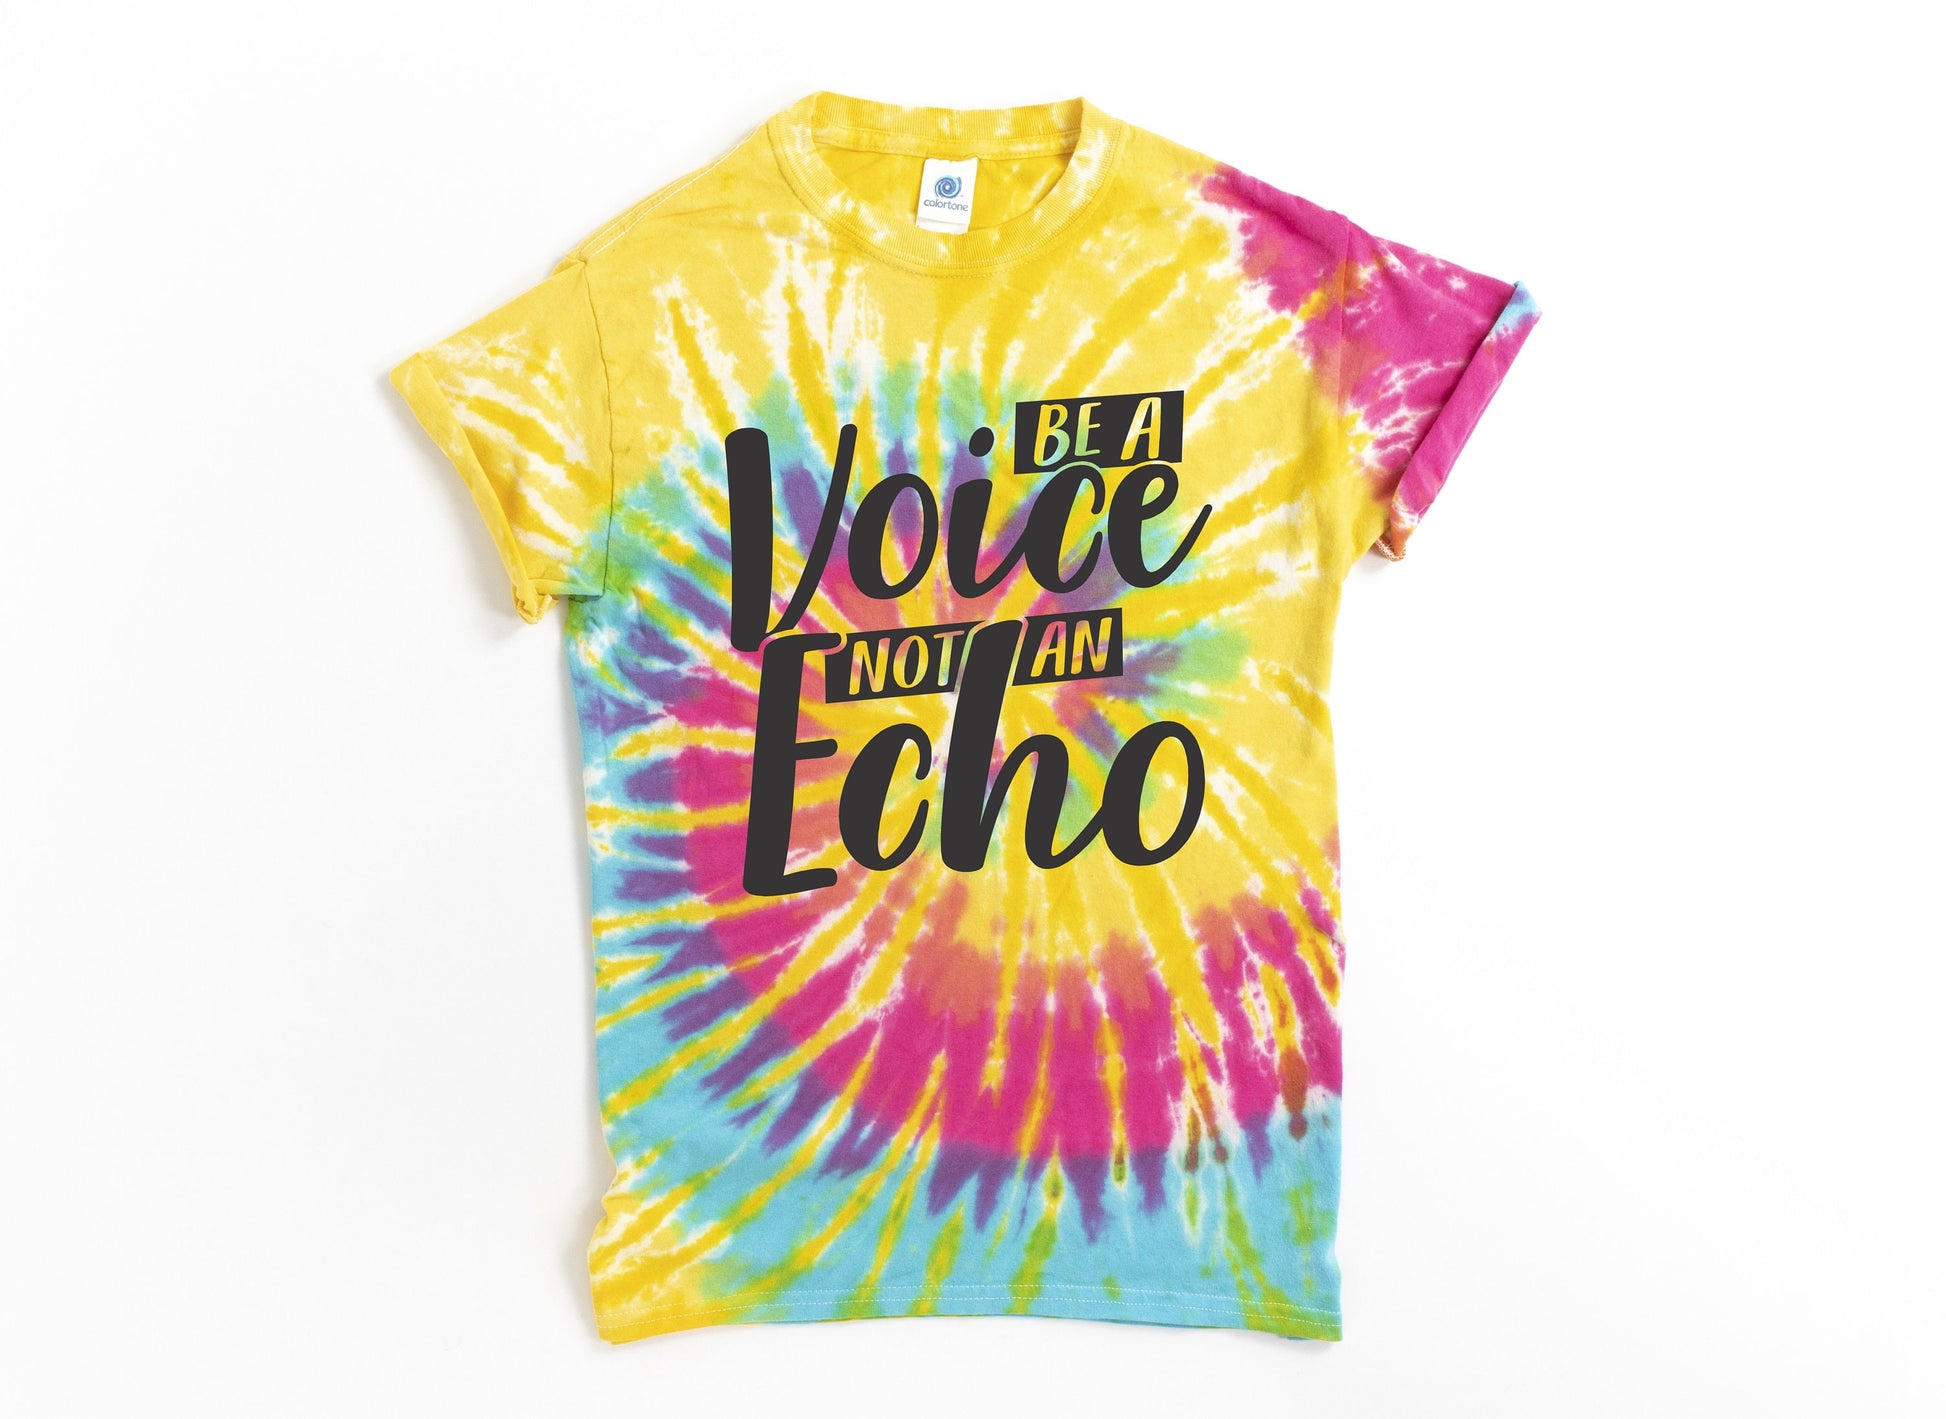 Be a Voice Not an Echo Tie Dye t-shirt - Kids and Adults Sizes - Tie Dye Festival Shirt - Activist shirt - Equality Shirt - Protest Shirt